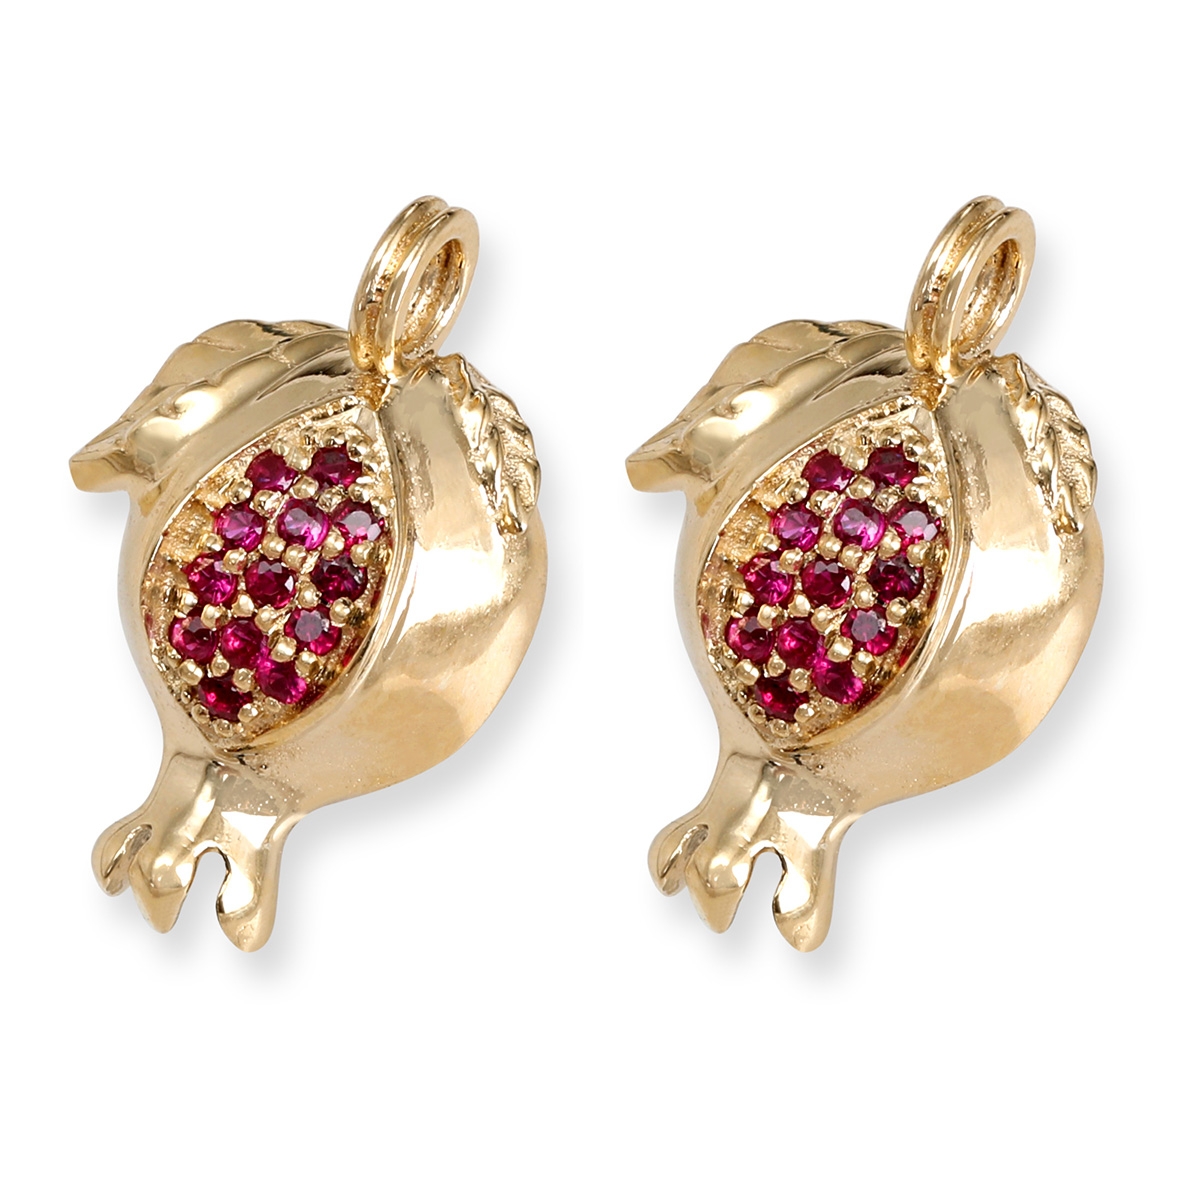 Rafael Jewelry Handcrafted 14K Yellow Gold Pomegranate Earrings With Pink Ruby Stones - 1